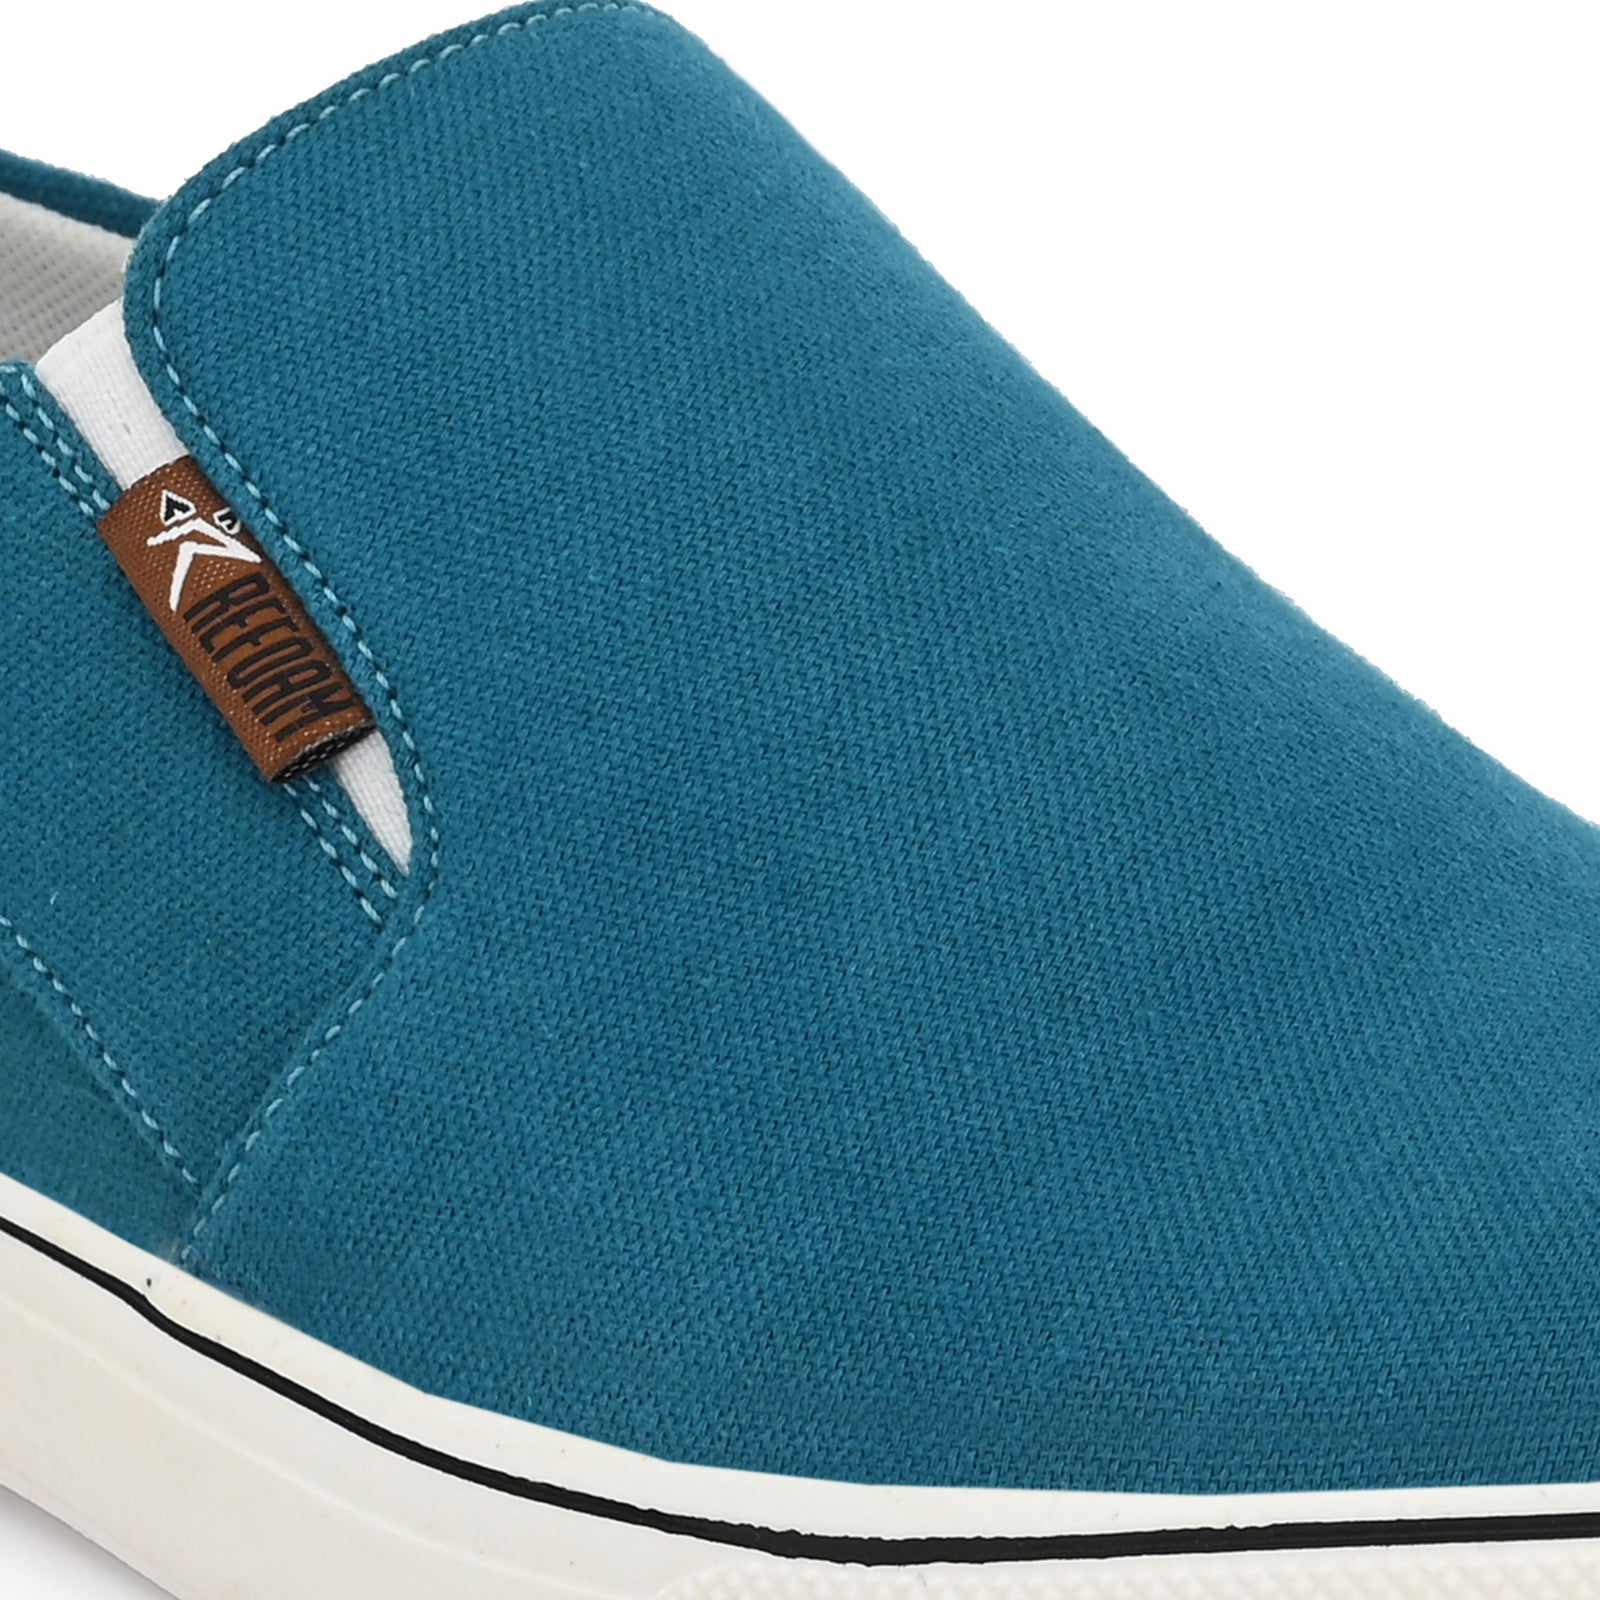 Green Solid Fabric Slip On Lifestyle Casual Shoes For Men